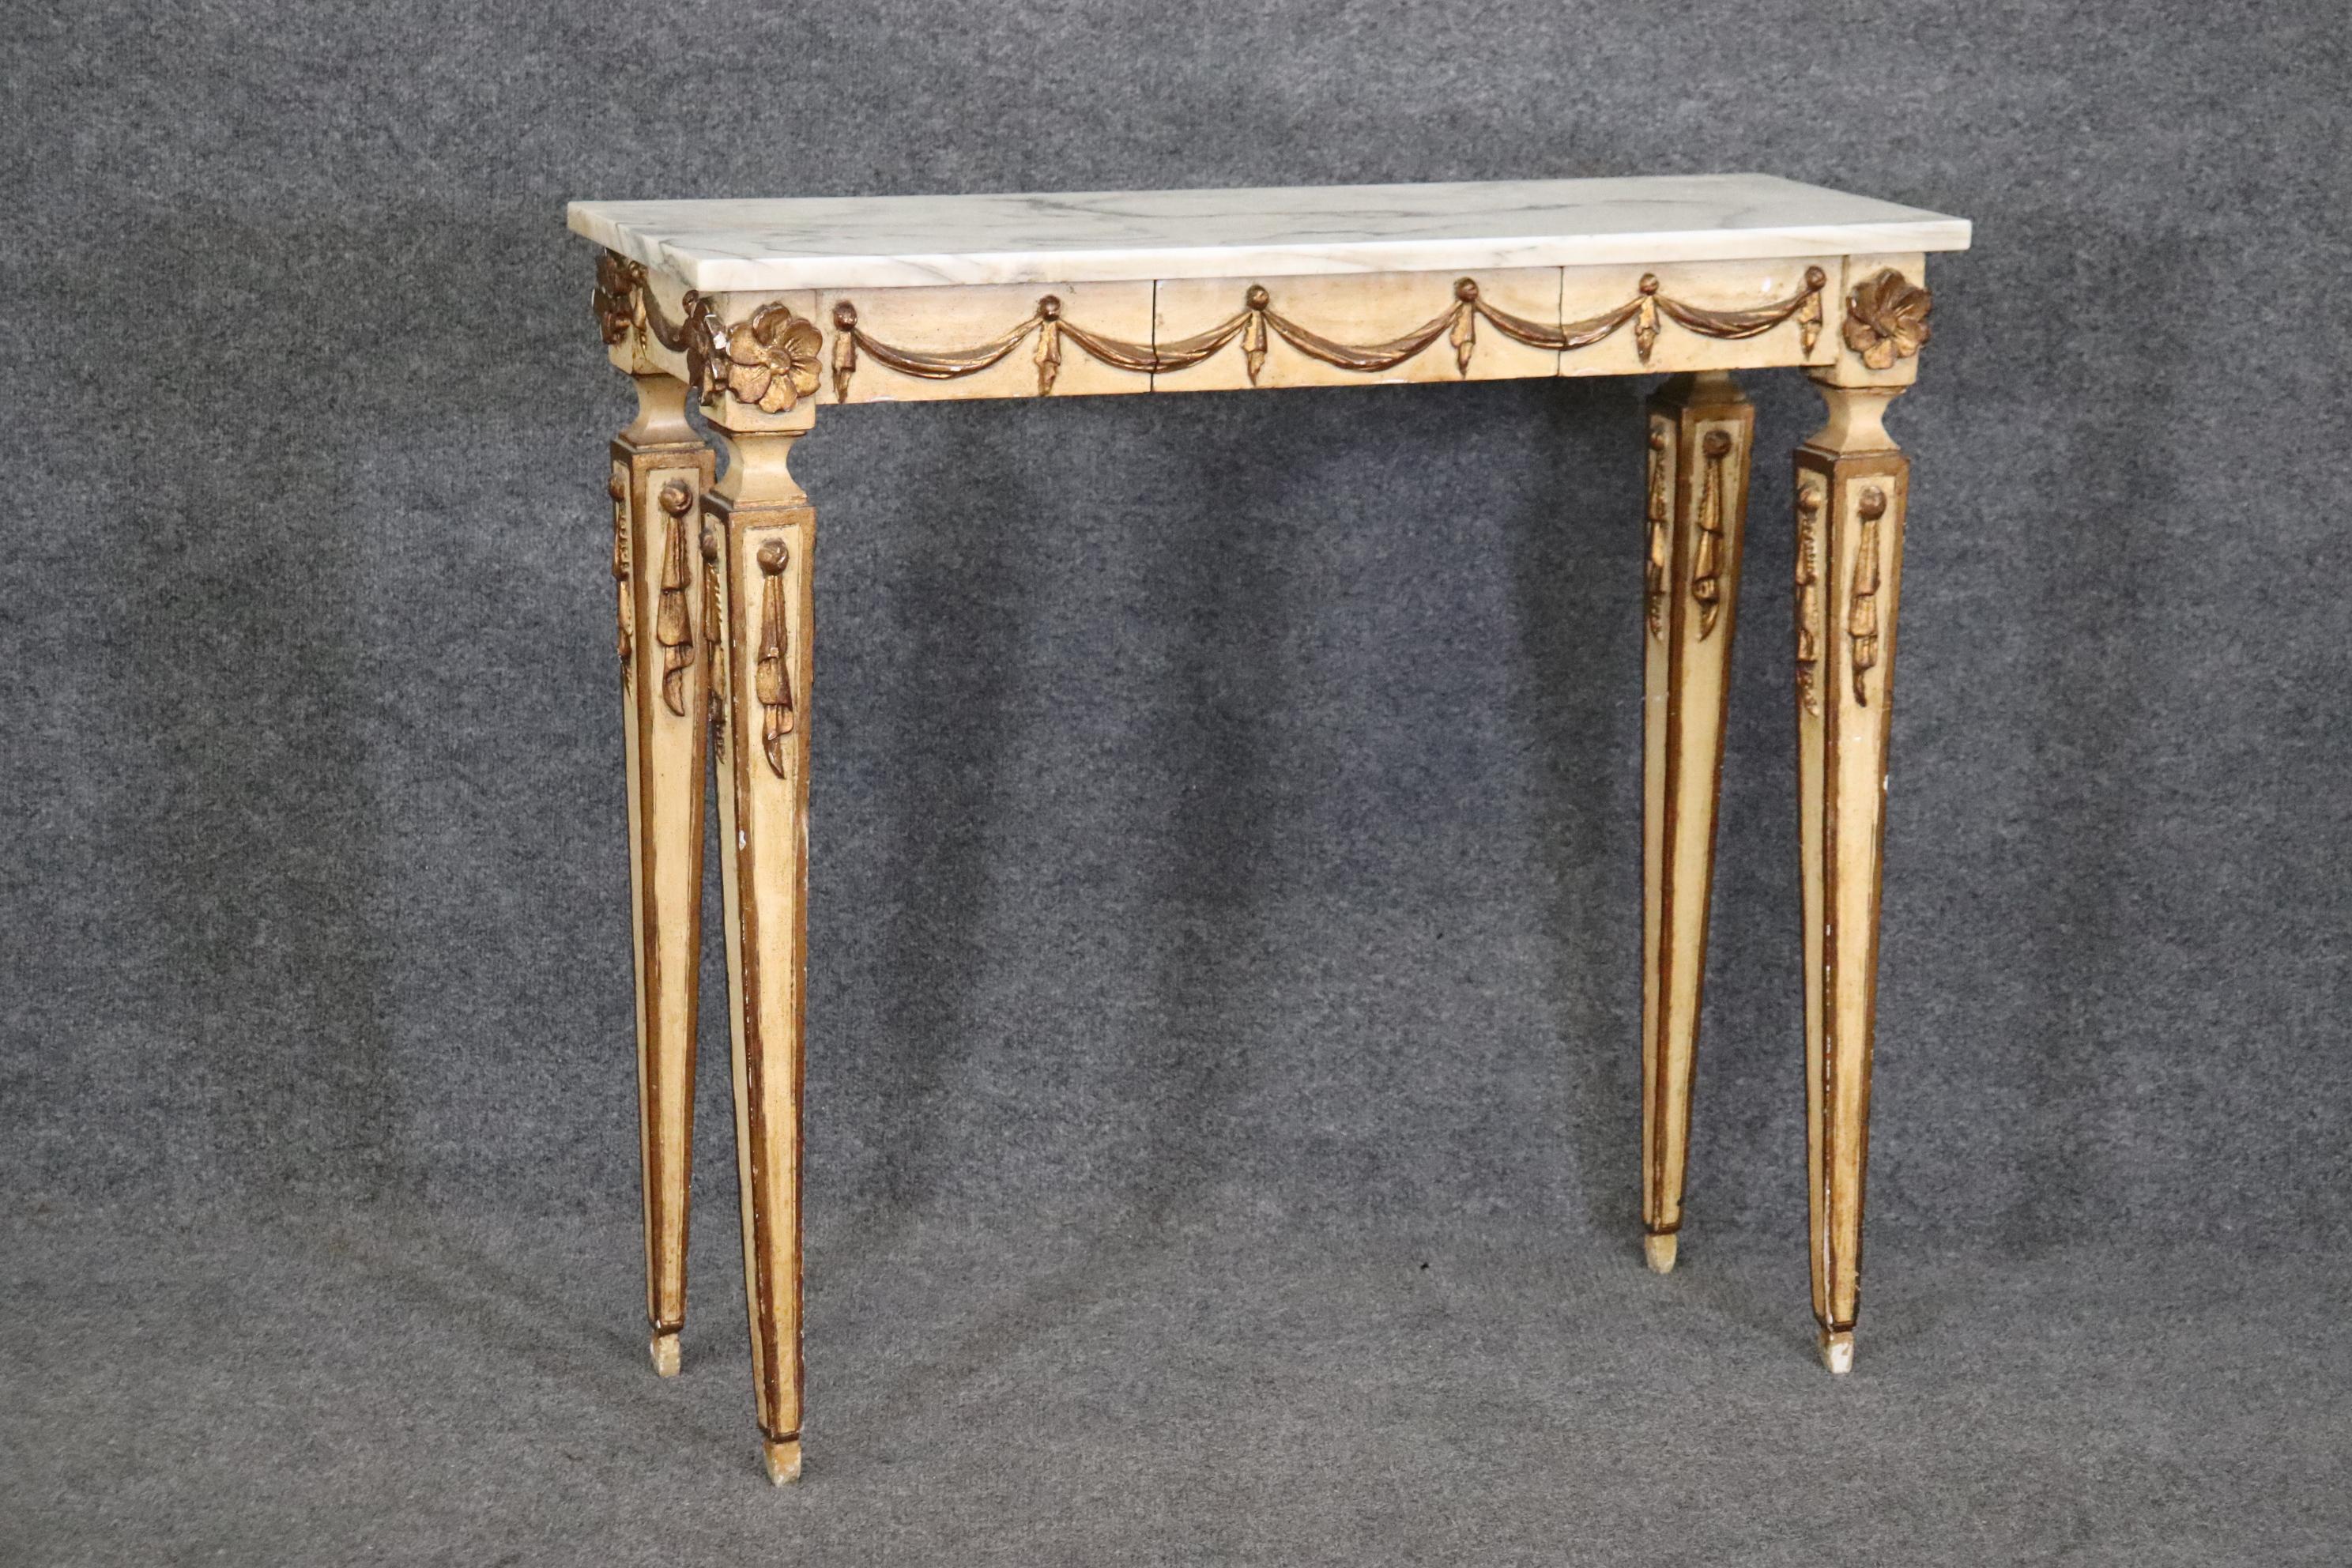 This is a gorgeous painted decorated 1950s era Italian-made console table with a drawer in the center. The table has its original creme painted surface and gold details. The table will show stains, signs of use such as chips, finish losses etc. The